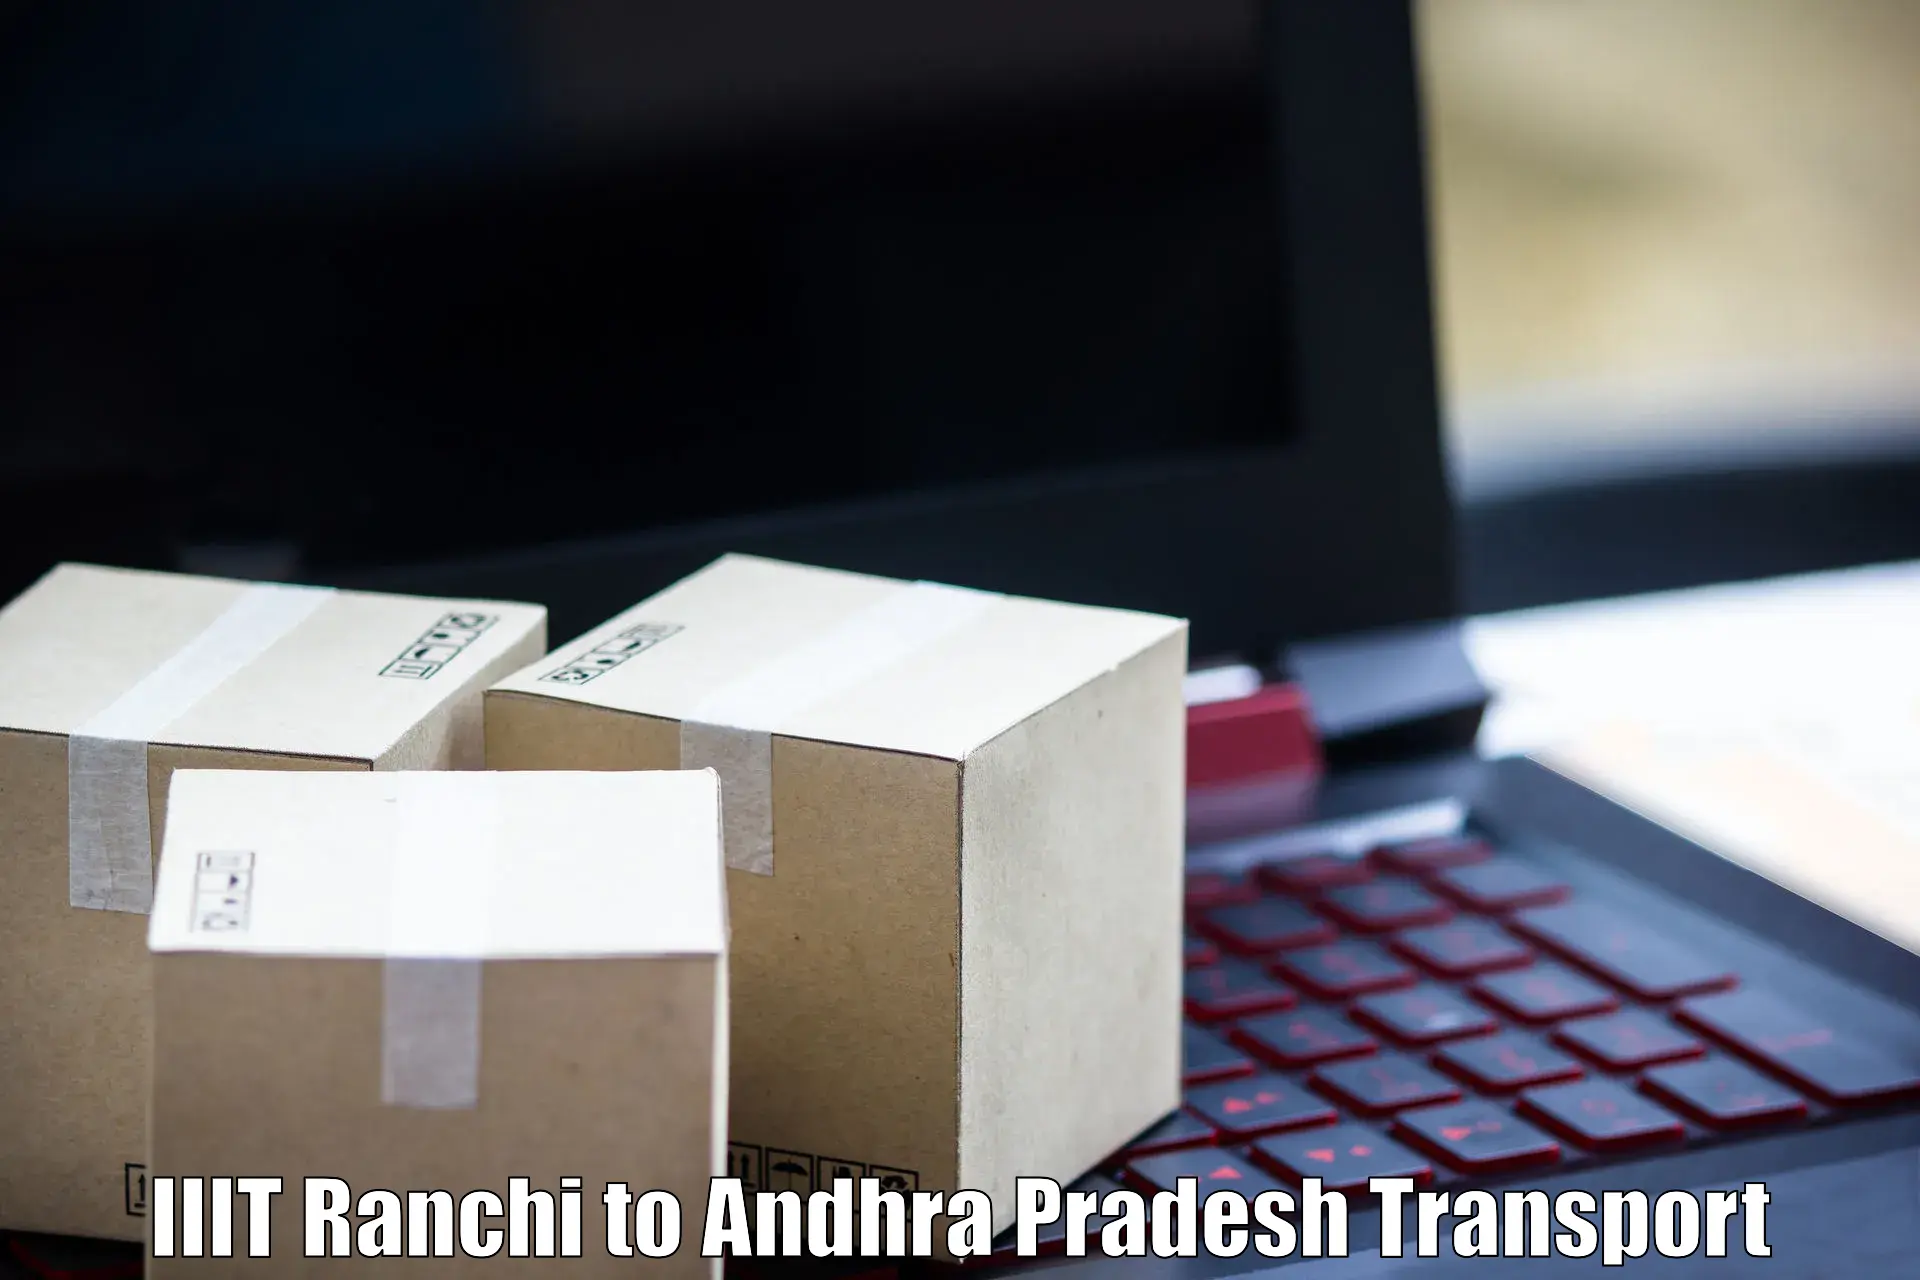 Truck transport companies in India IIIT Ranchi to Sirvella